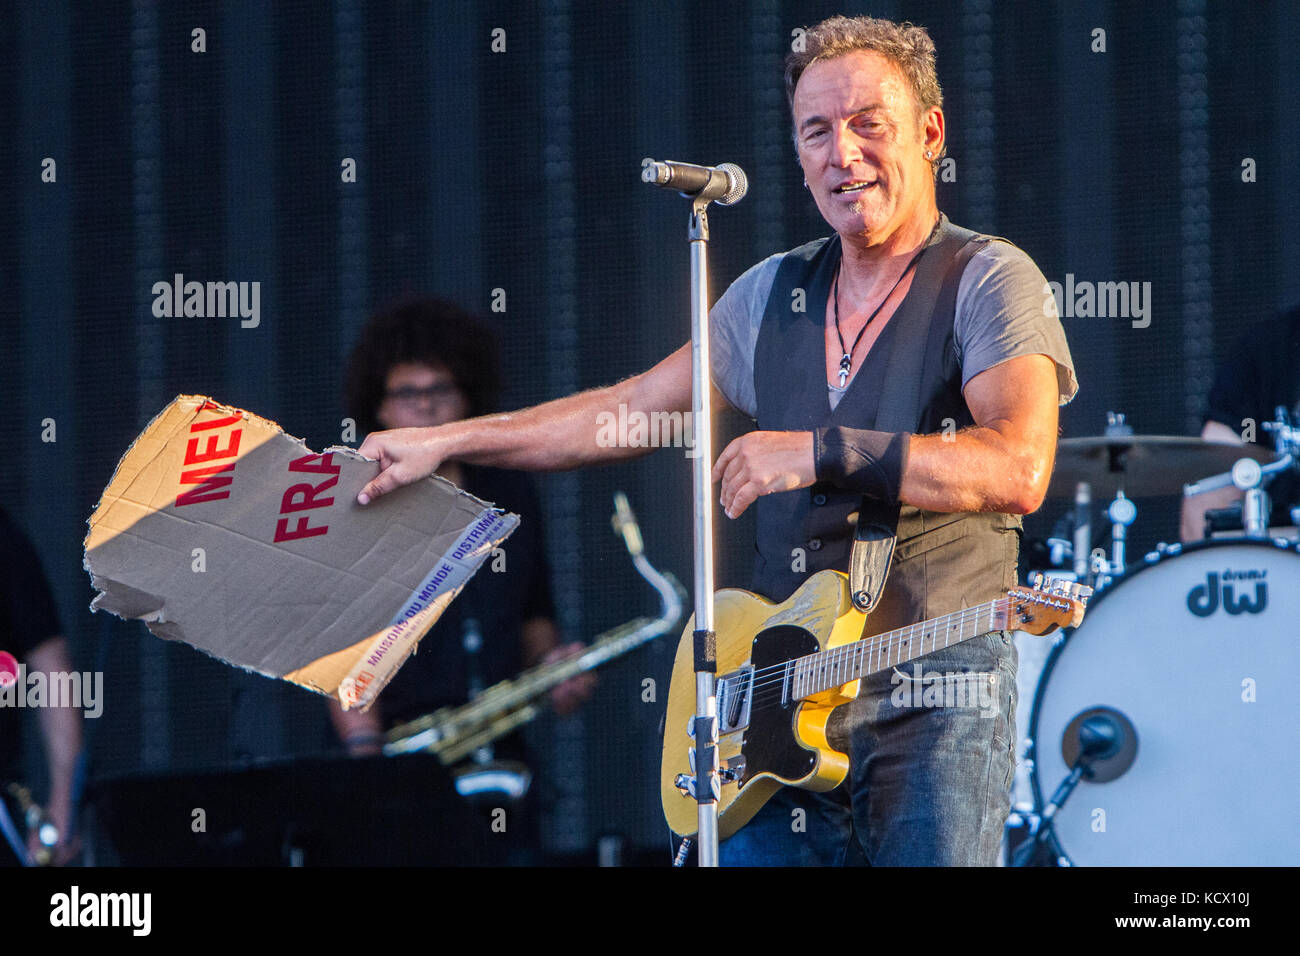 Zurich Switzerland. 09th July 2012. Bruce Springsteen performs live on stage at Stadion Letzigrund during the 'Wrencking Ball Tour' Stock Photo